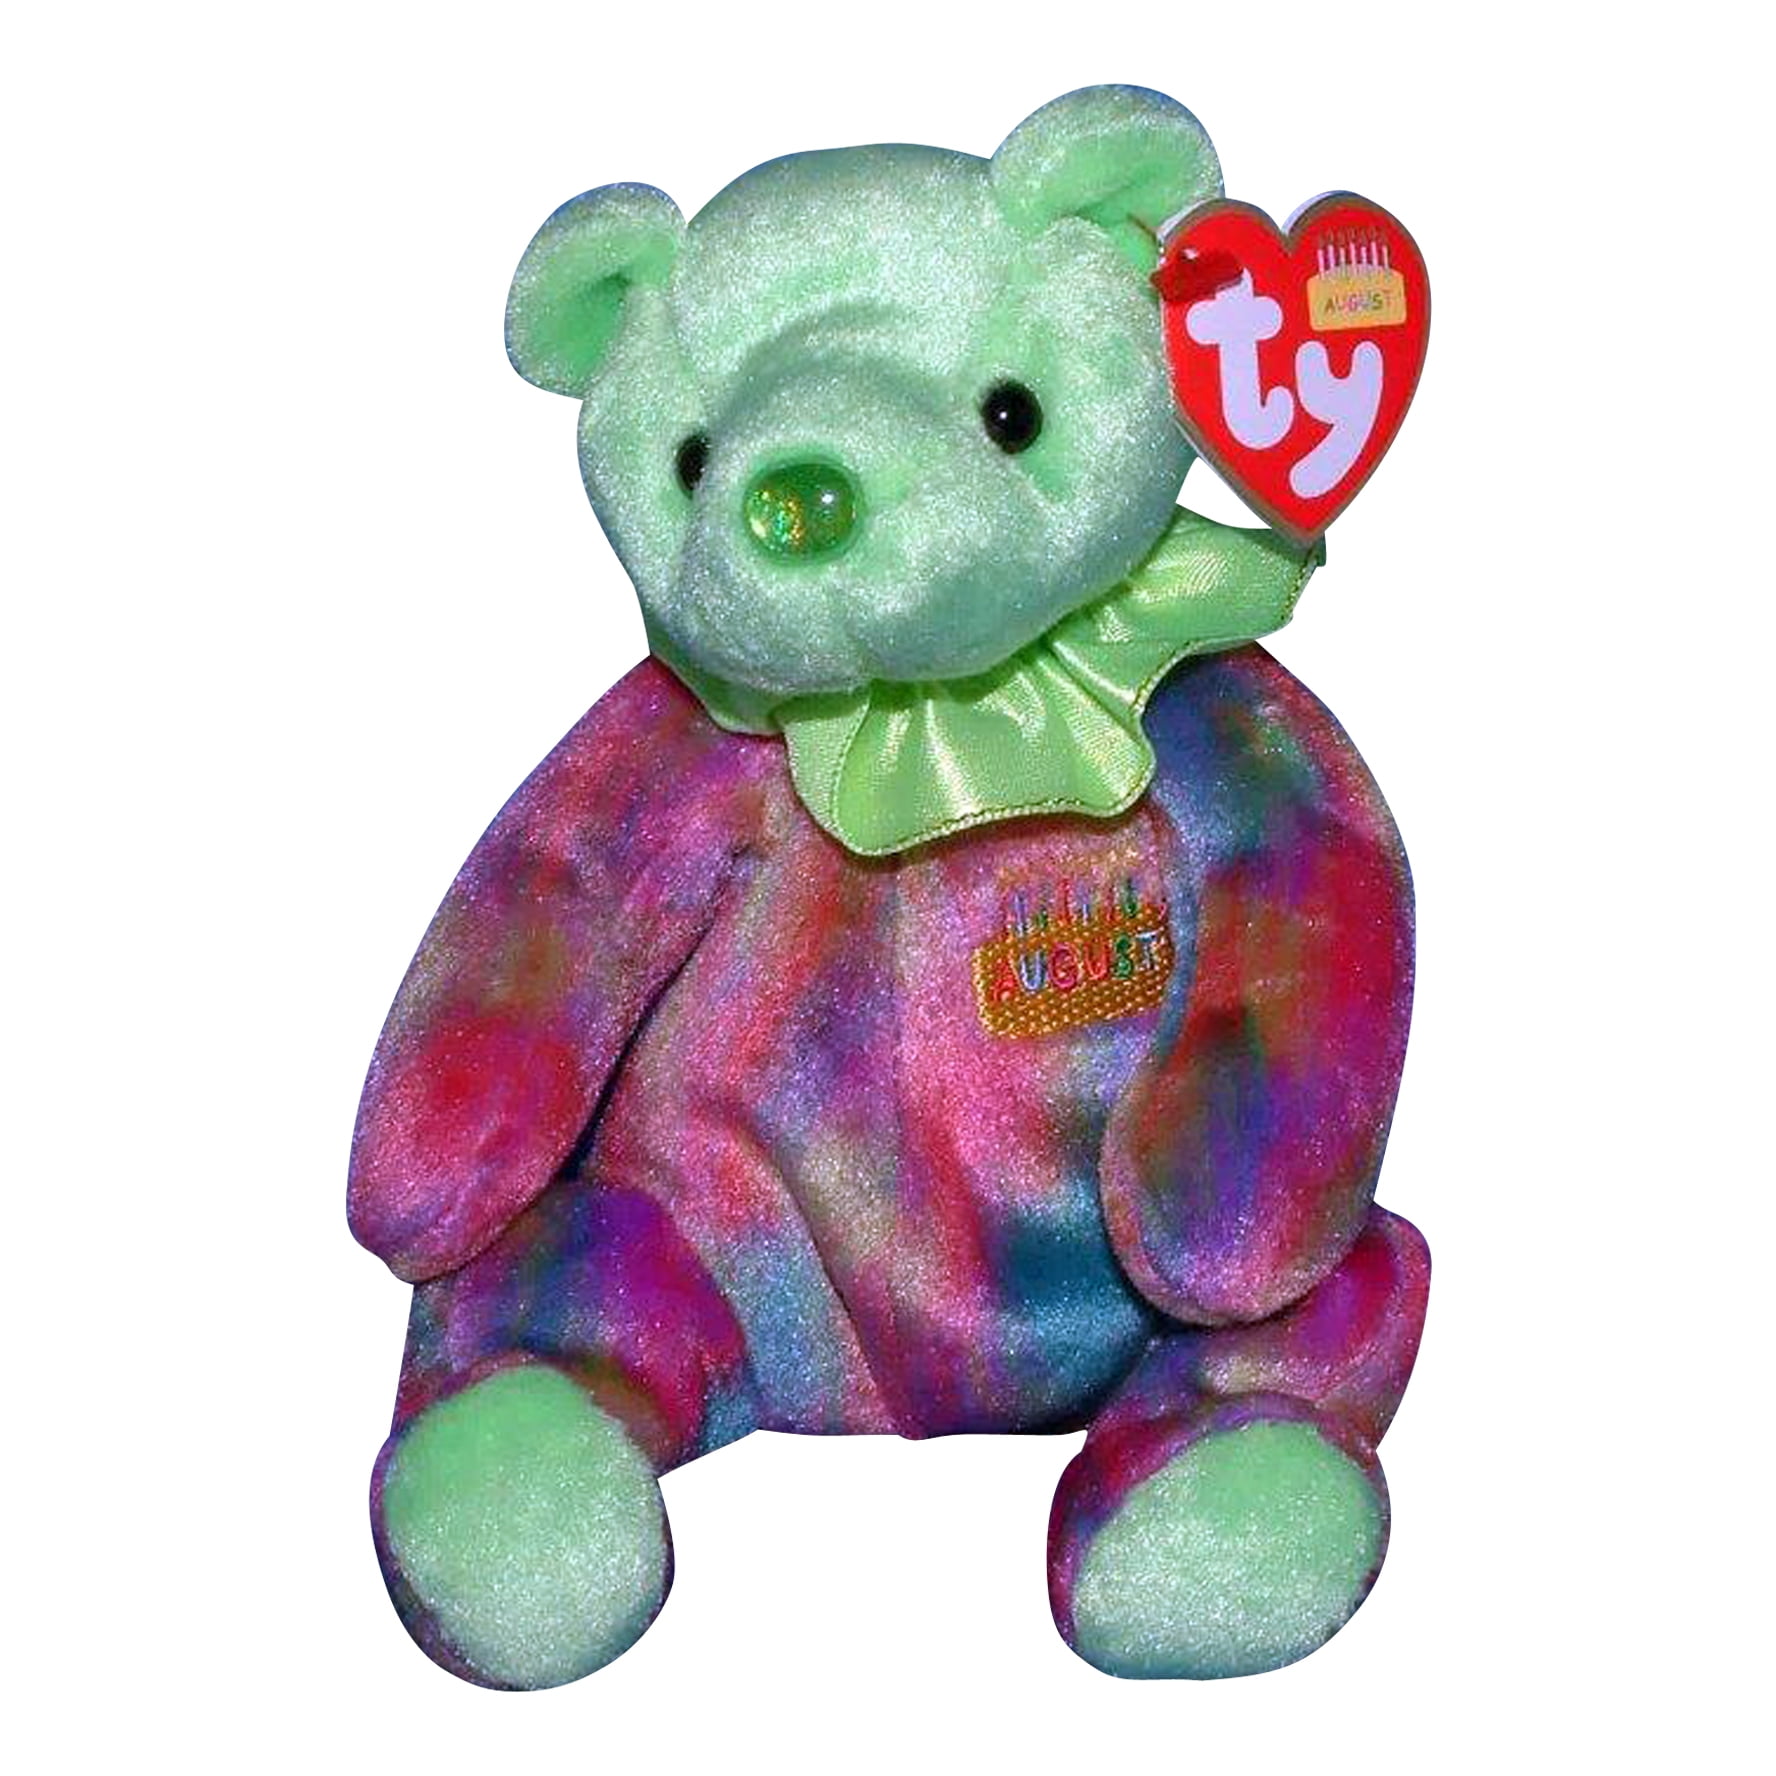 MINT with MINT TAG TY AUGUST the BIRTHDAY BEAR BEANIE BABY 